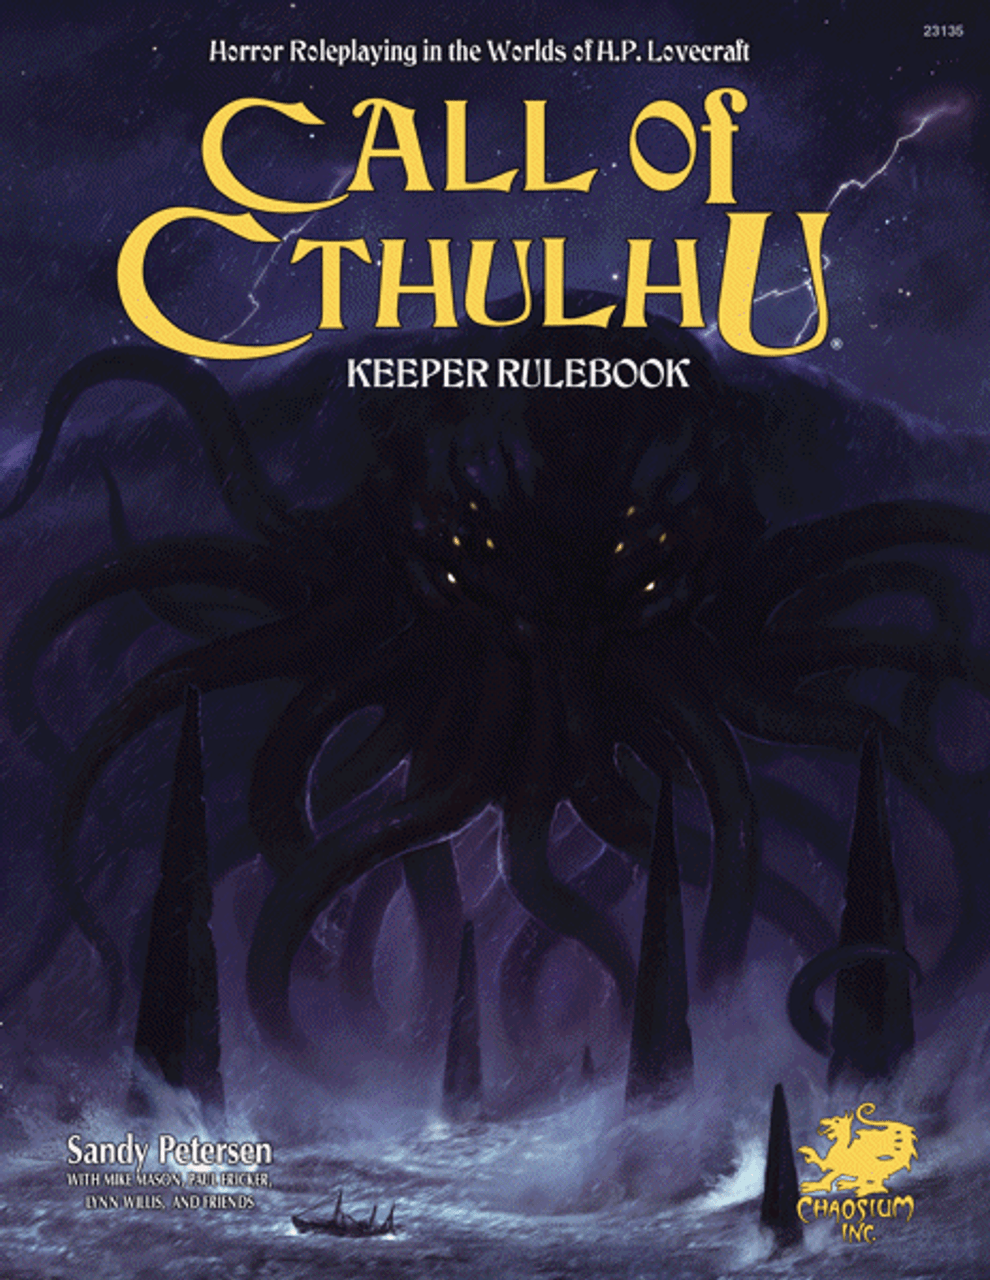 Play Call of Cthulhu by Chaosium